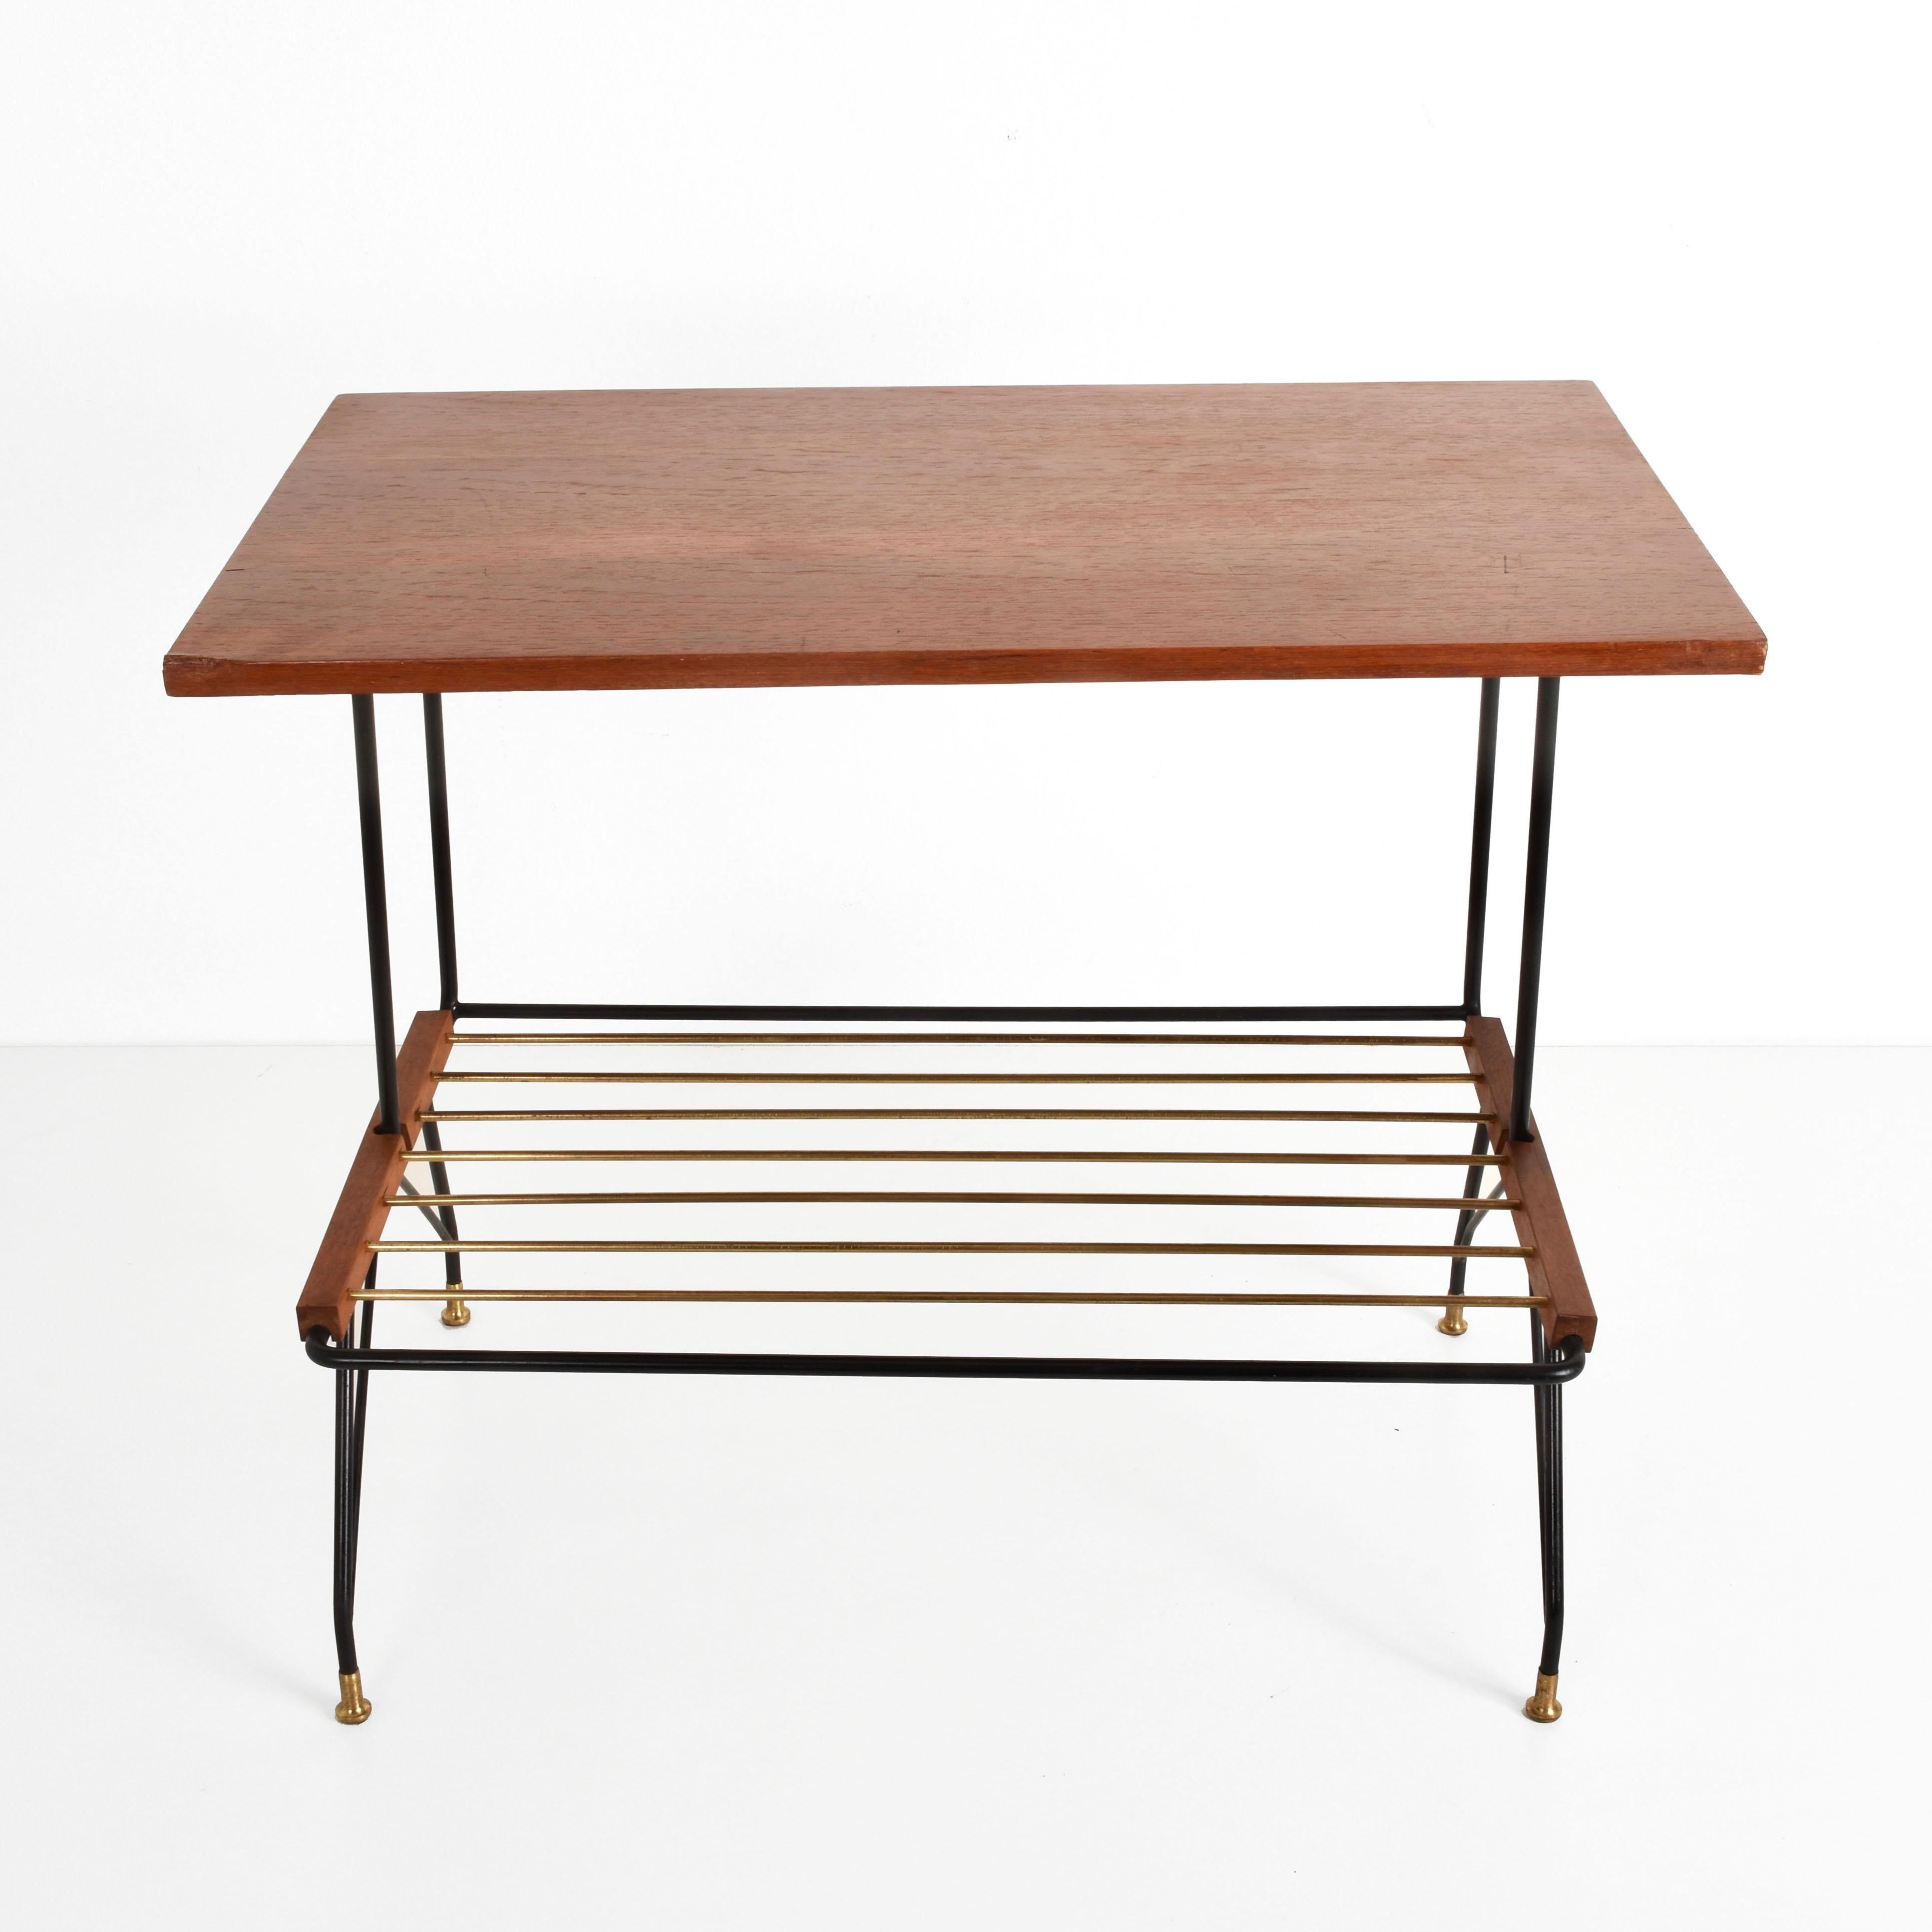 Wonderful midcentury coffee table produced by Mobili Pizzetti Roma. This console table was produced in Italy during 1950s.

It is a rare and elegant wood and black metal end table with a brass magazine rack and marvelous brass feet.

The item is